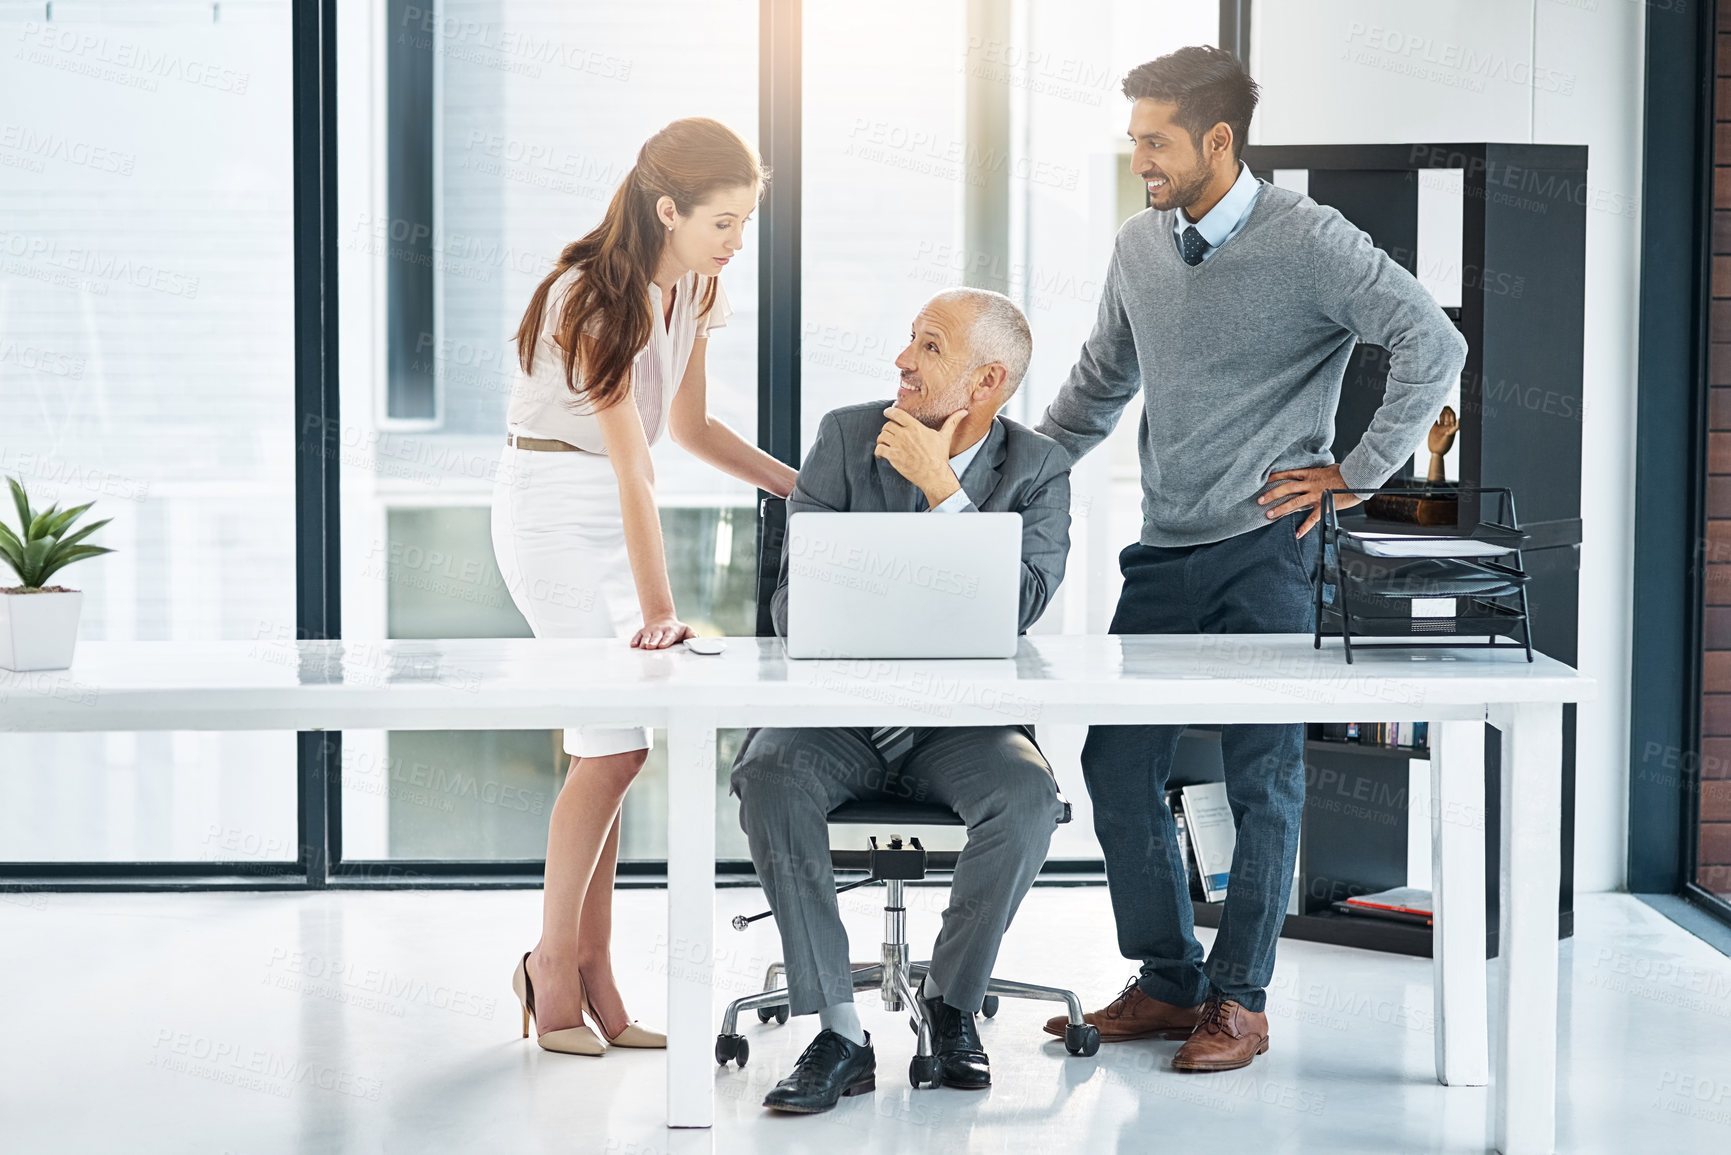 Buy stock photo Full length shot of three businesspeople using a laptop in the office